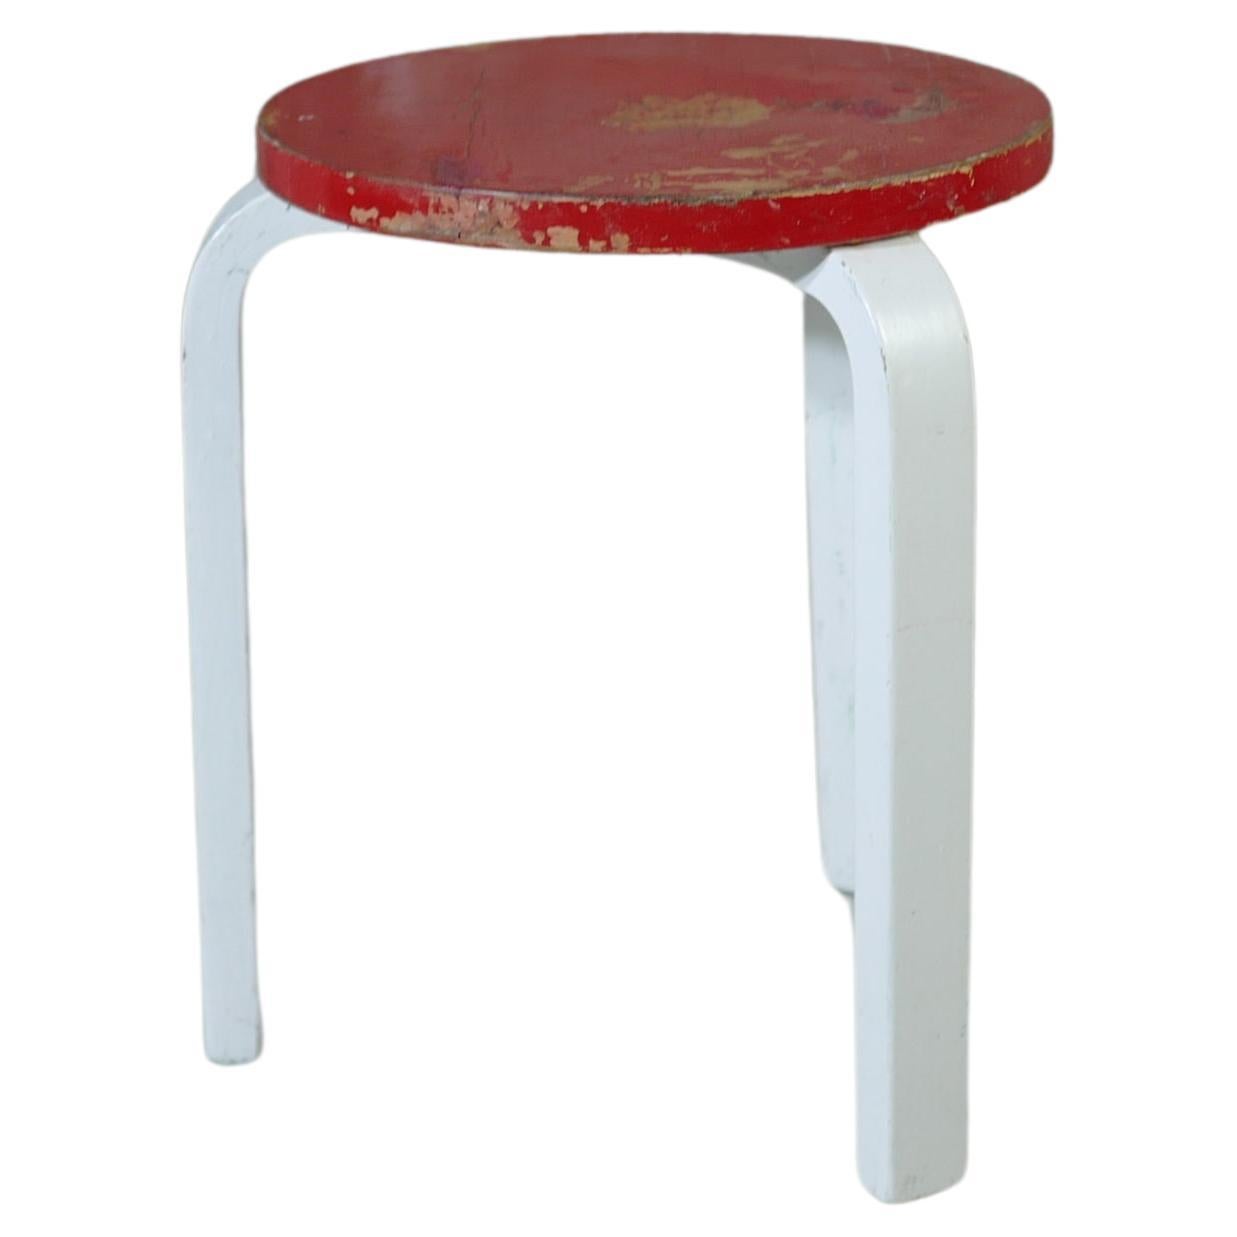 alvar aalto stool60 painted red 1930's For Sale